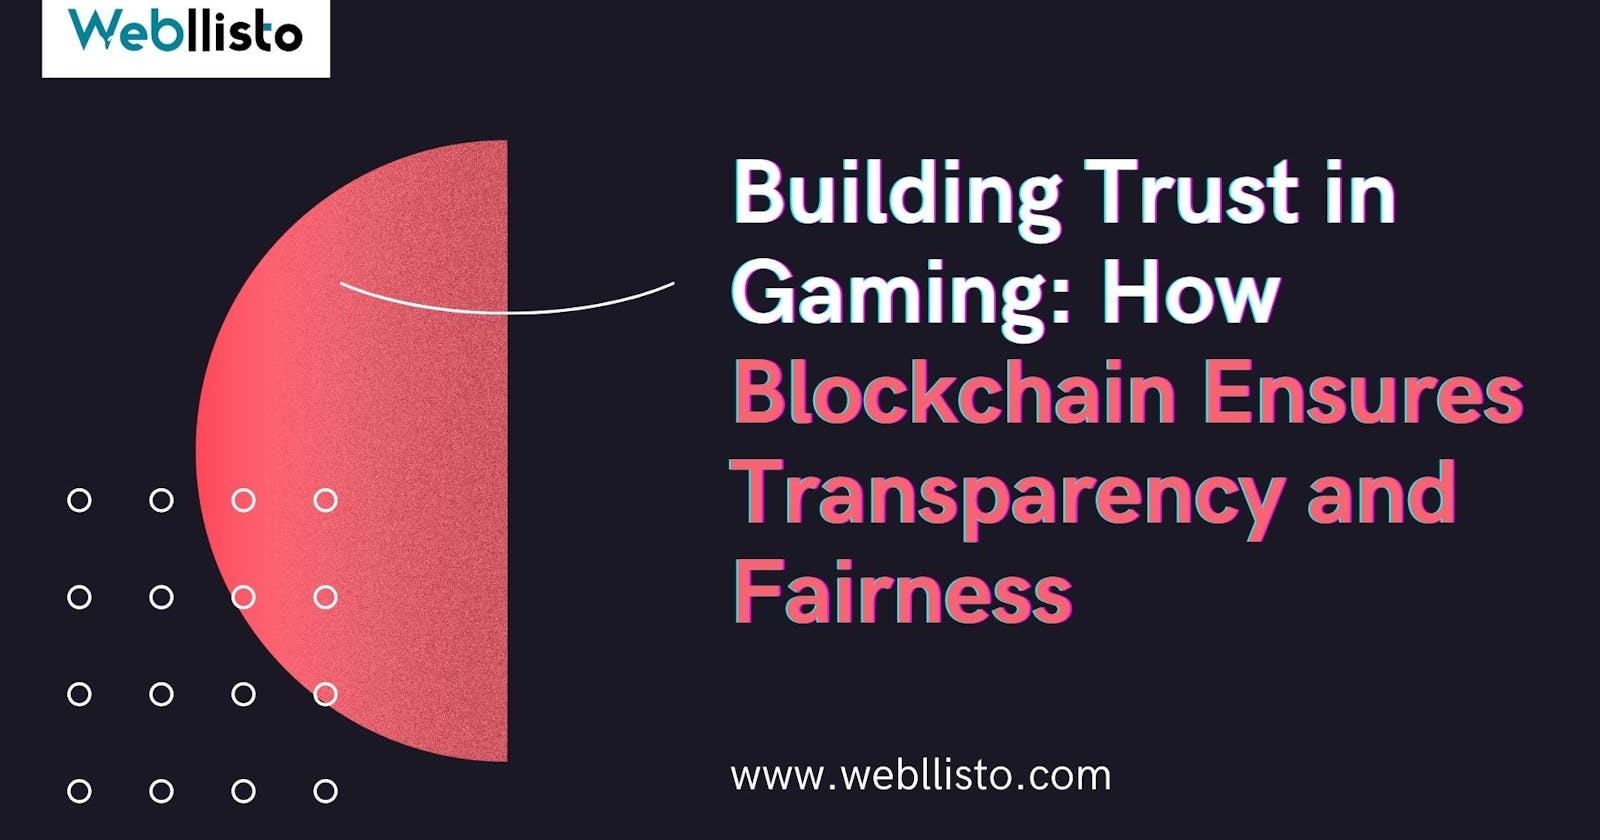 Building Trust in Gaming: How Blockchain Ensures Transparency and Fairness